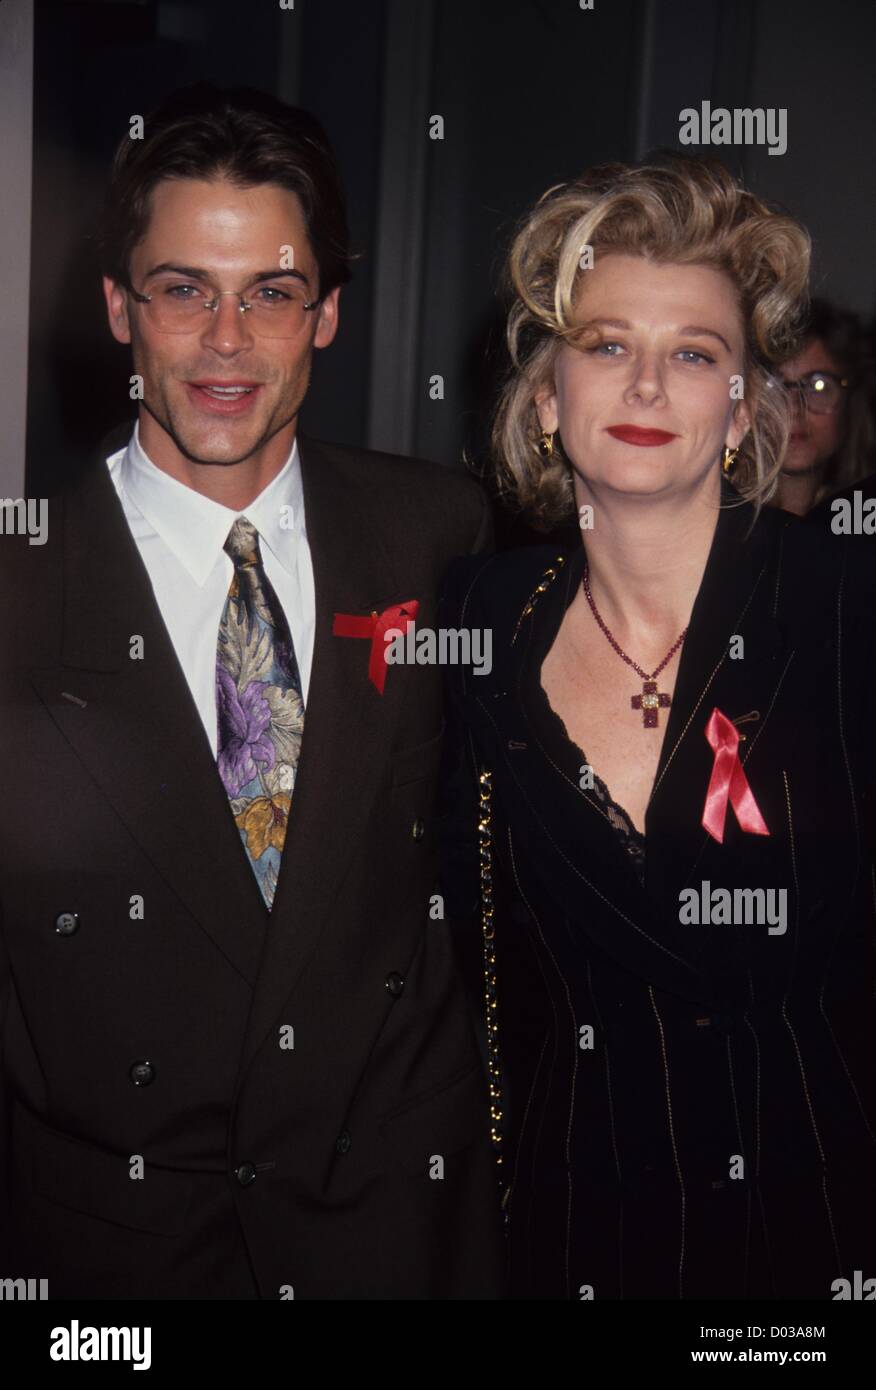 ROB LOWE with wife at the premiere of Suddemly Last Summer 1992.l4534.(Credit Image: © Stephen Trupp/Globe Photos/ZUMAPRESS.com) Stock Photo